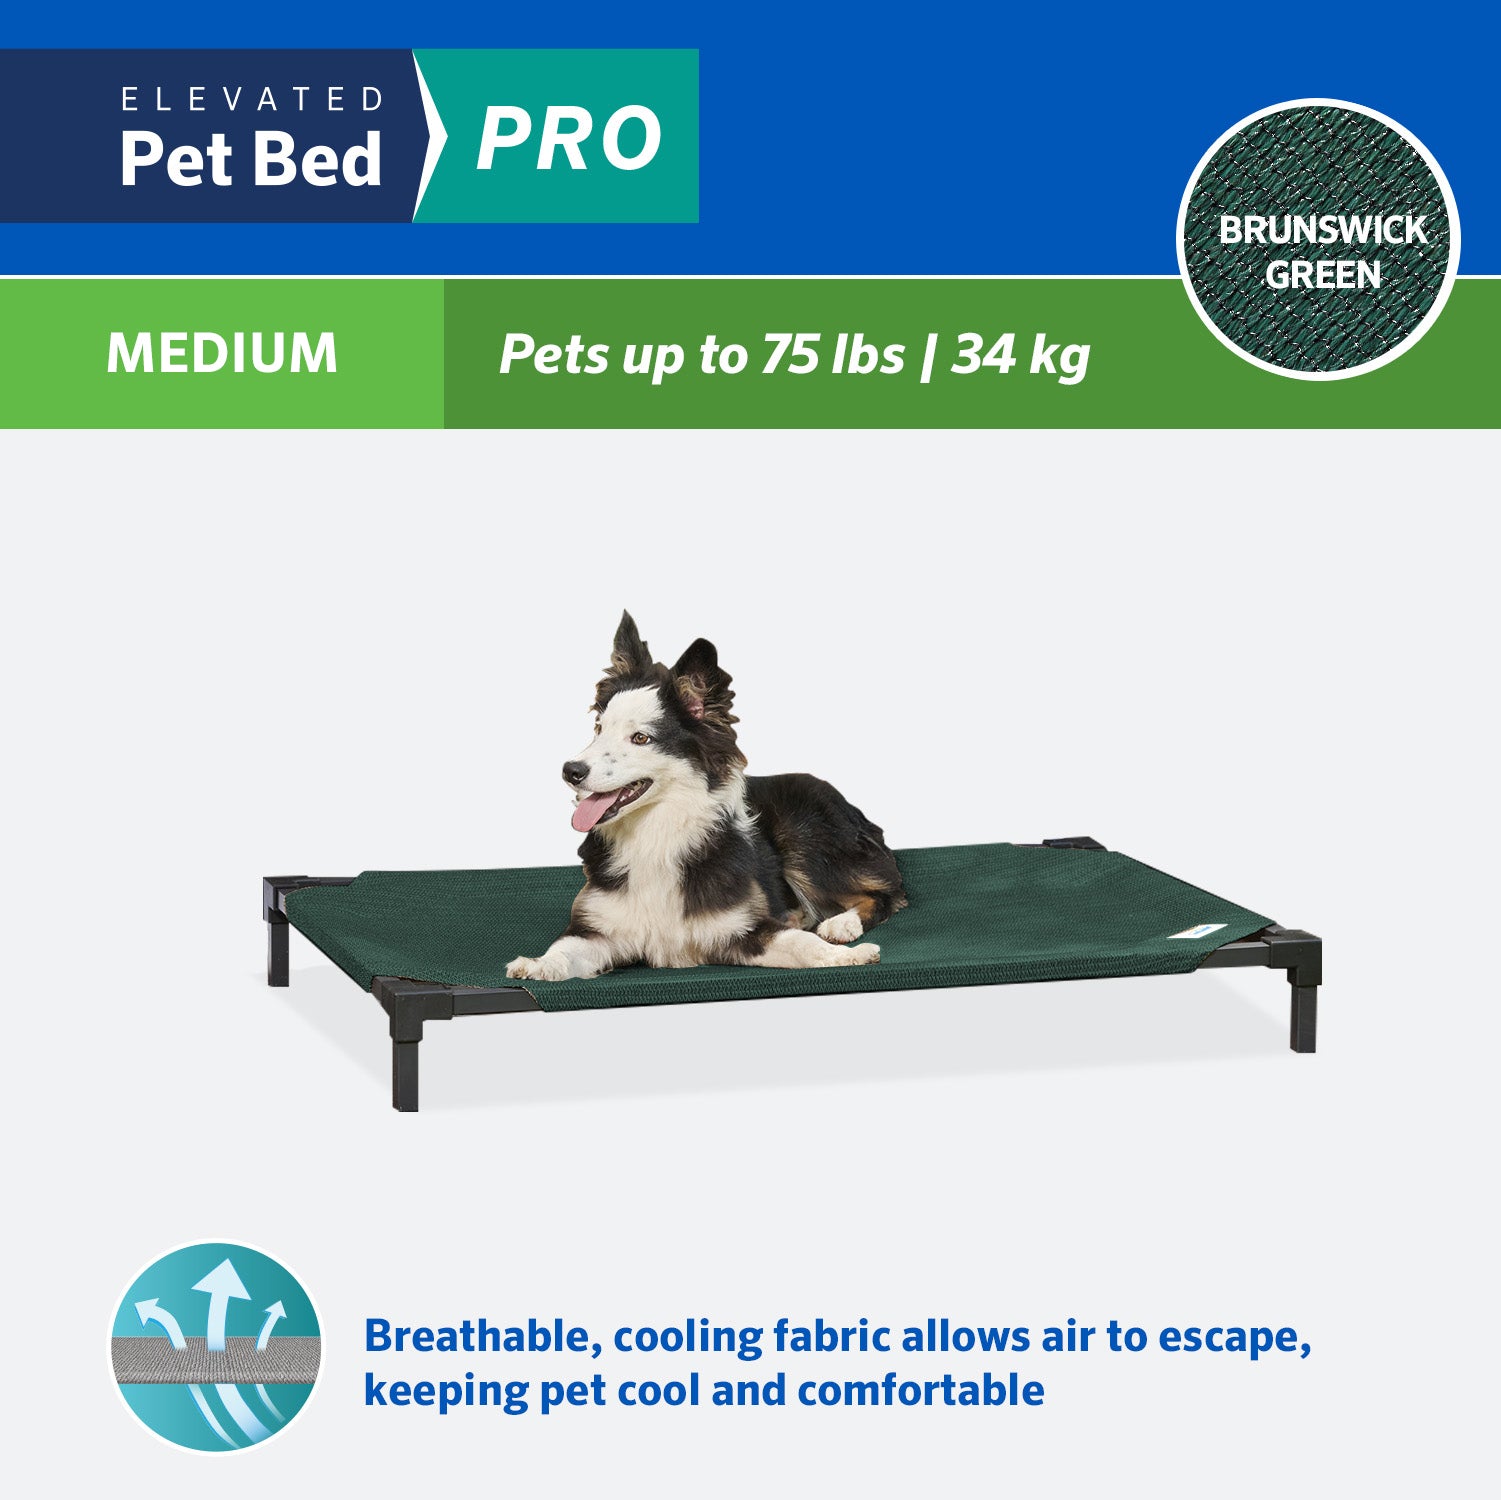 Coolaroo Cooling Elevated Dog Bed Pro， Medium， Fits in 42in Crates， Brunswick Green